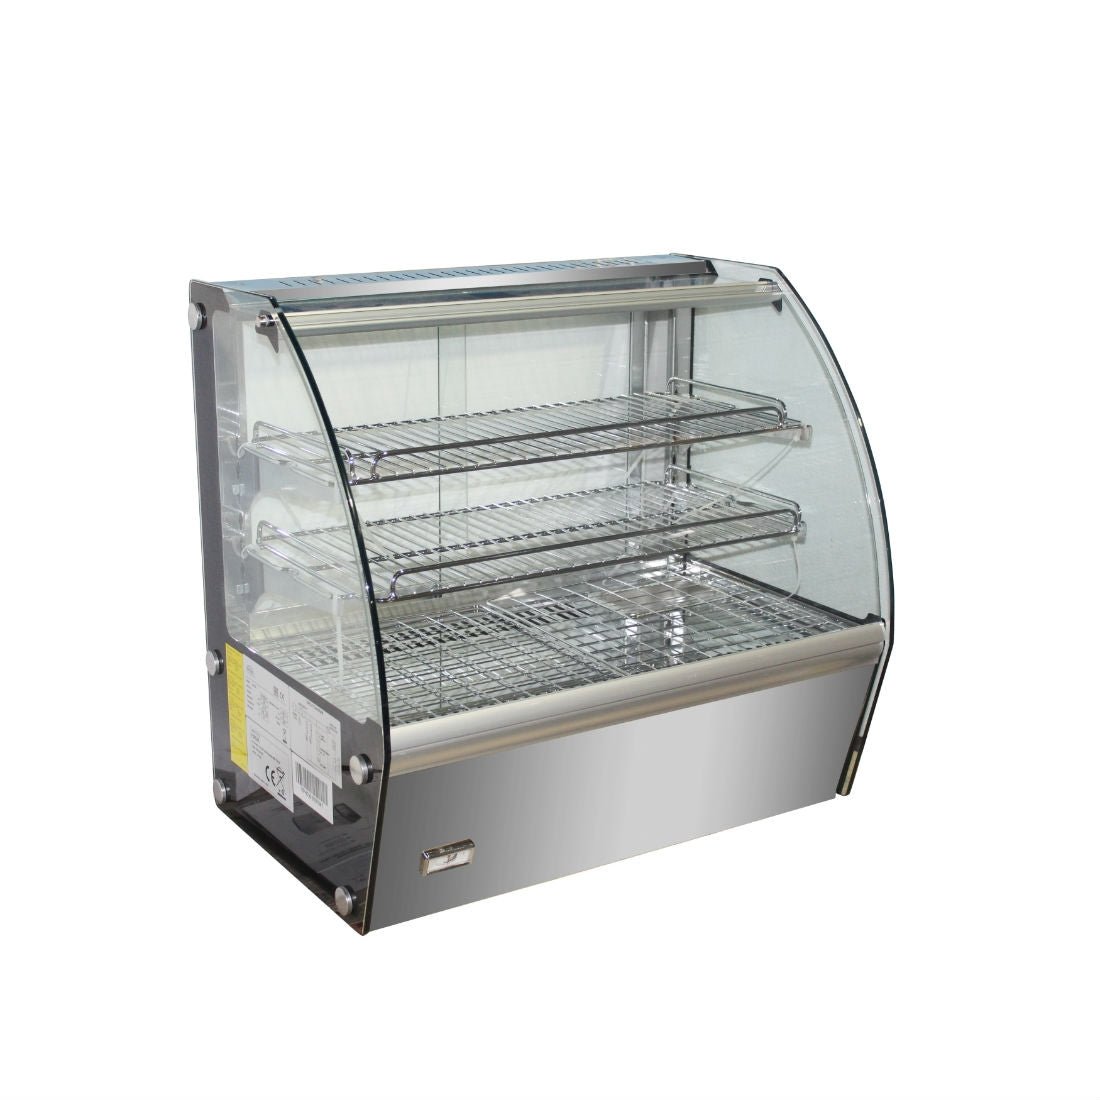 HTH120N – 120 litre Heated Counter-Top Food Display - Cafe Supply